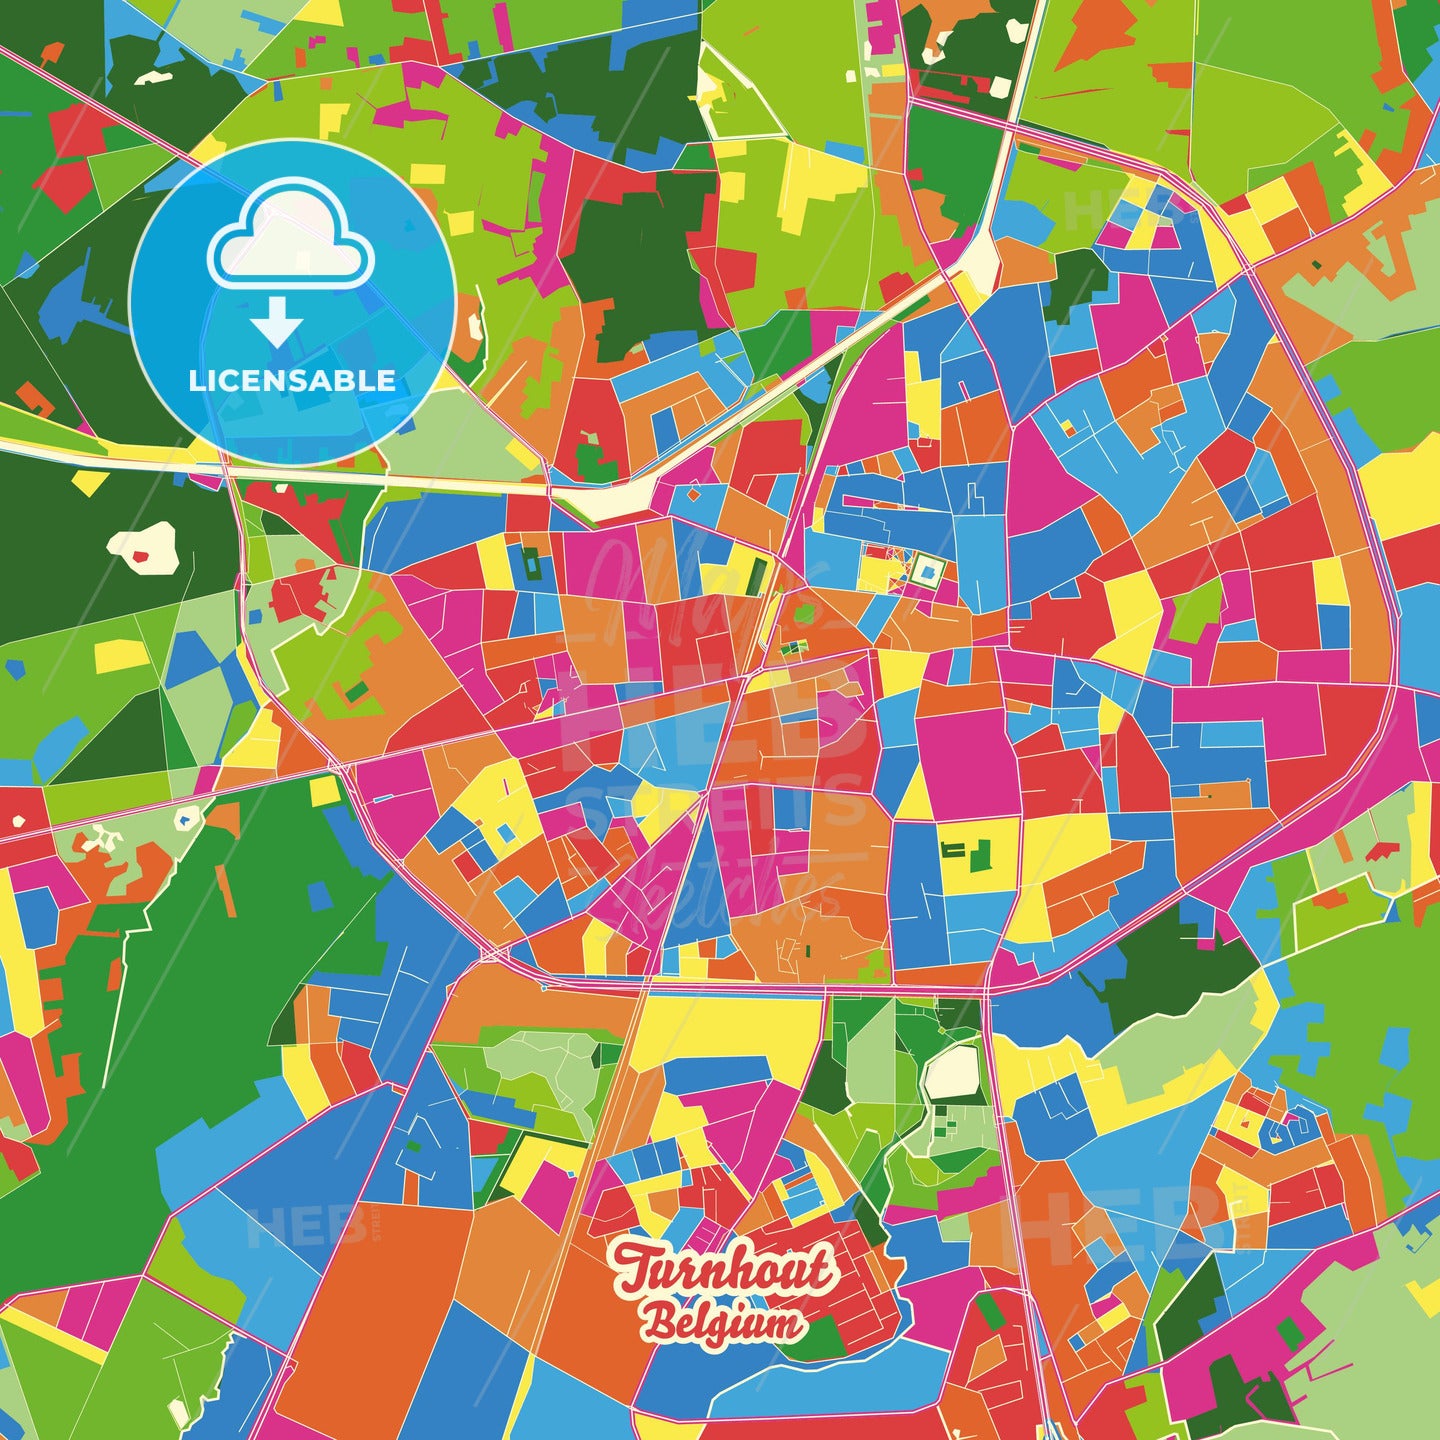 Turnhout, Belgium Crazy Colorful Street Map Poster Template - HEBSTREITS Sketches